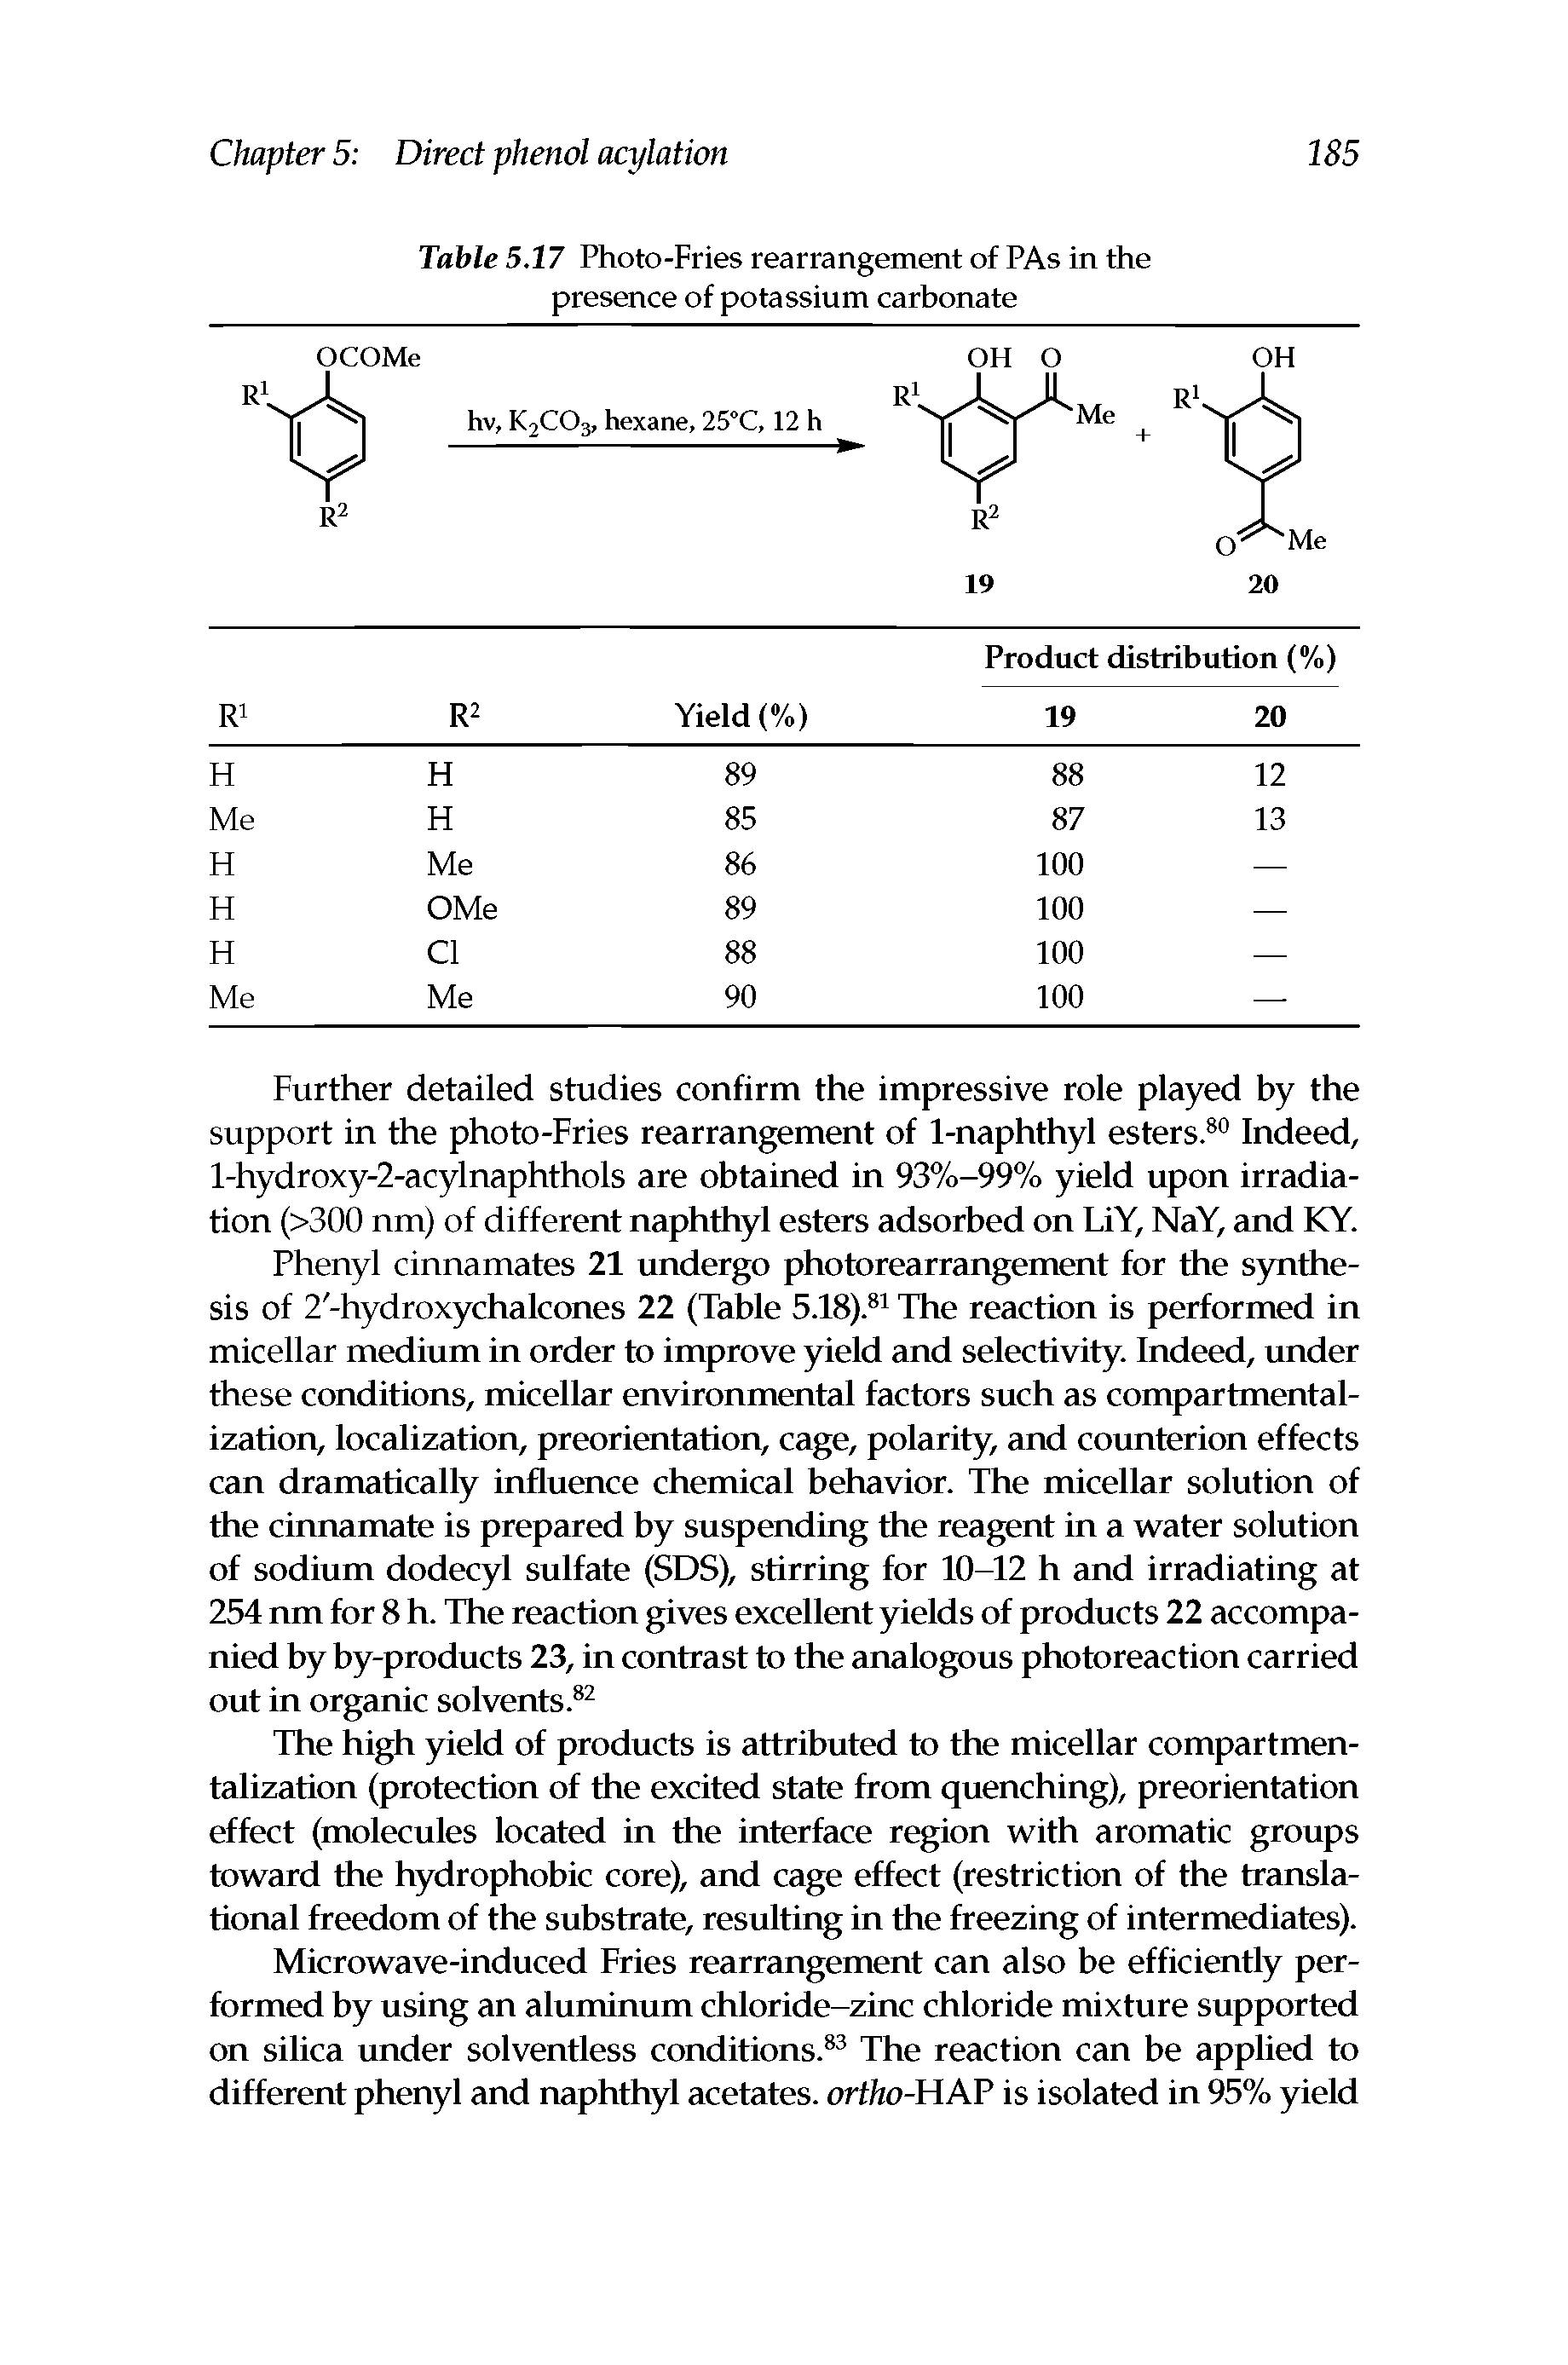 Table 5.17 Photo-Fries rearrangement of PAs in the presence of potassium carbonate...